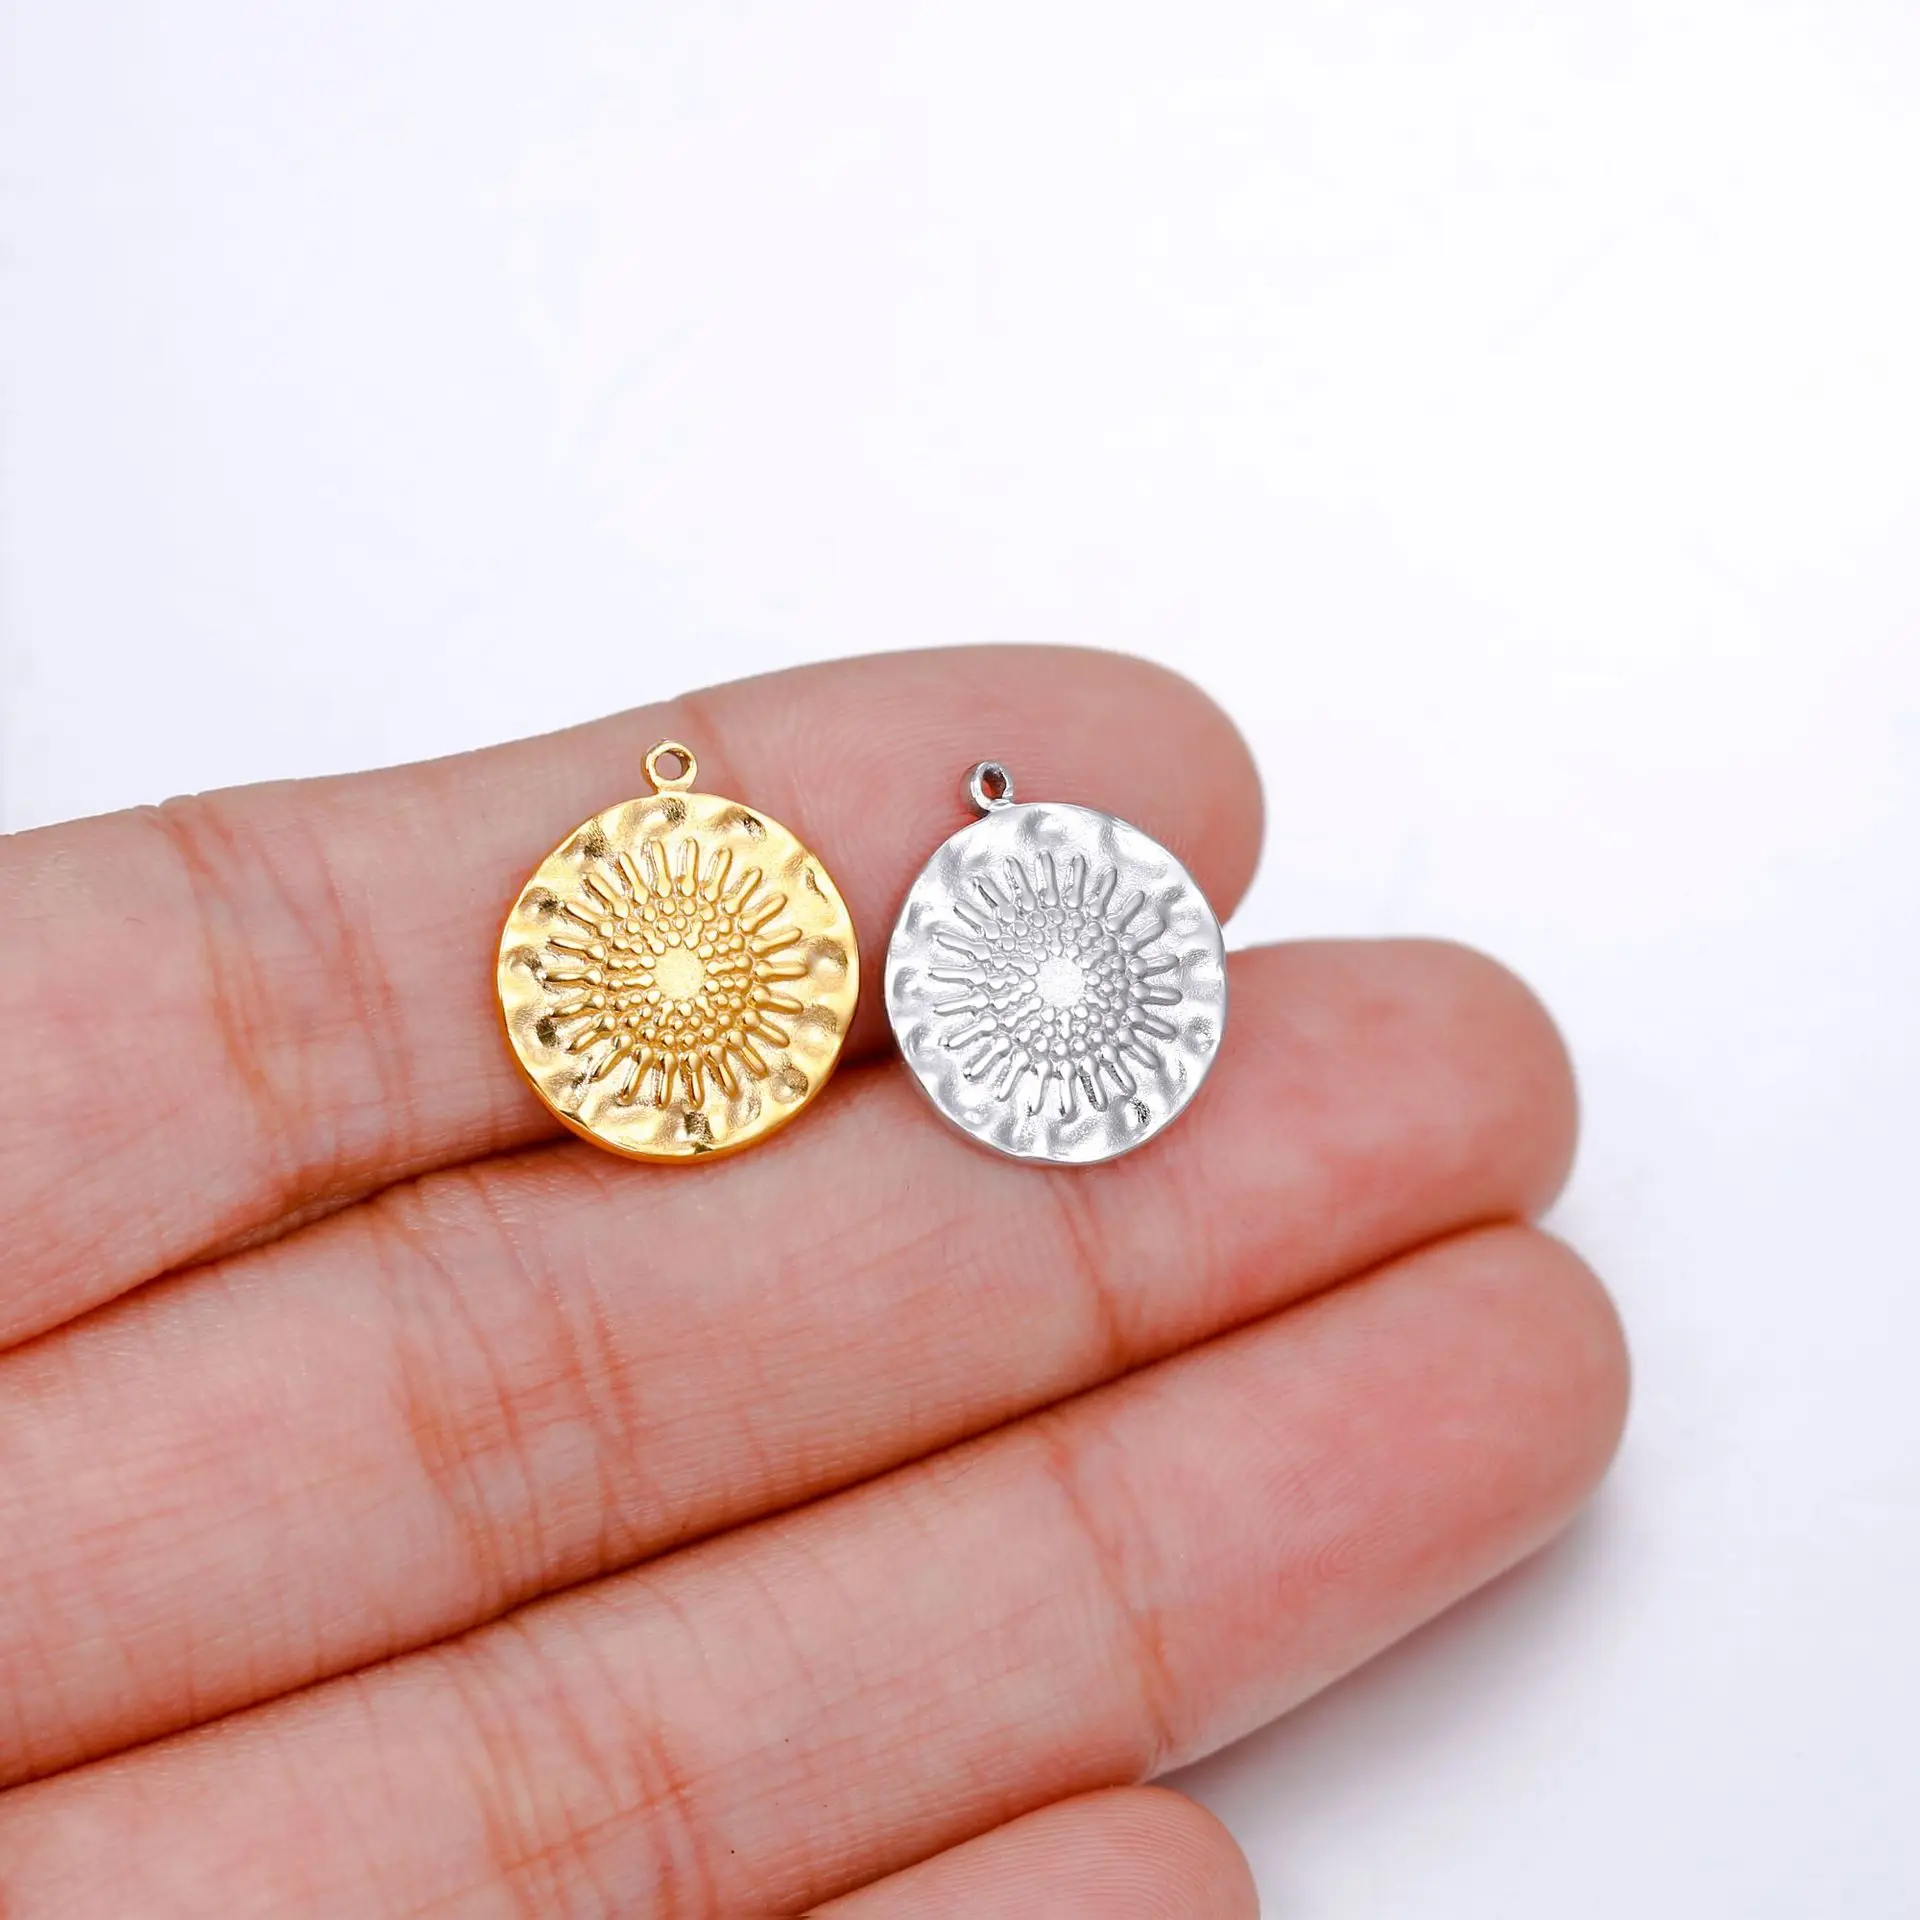 

3Psc/Lot Sunflower Charms for DIY Crafting Jewelry Bracelet Necklace Making Stainless Steel Charm Flower Pendant Charm Wholesale